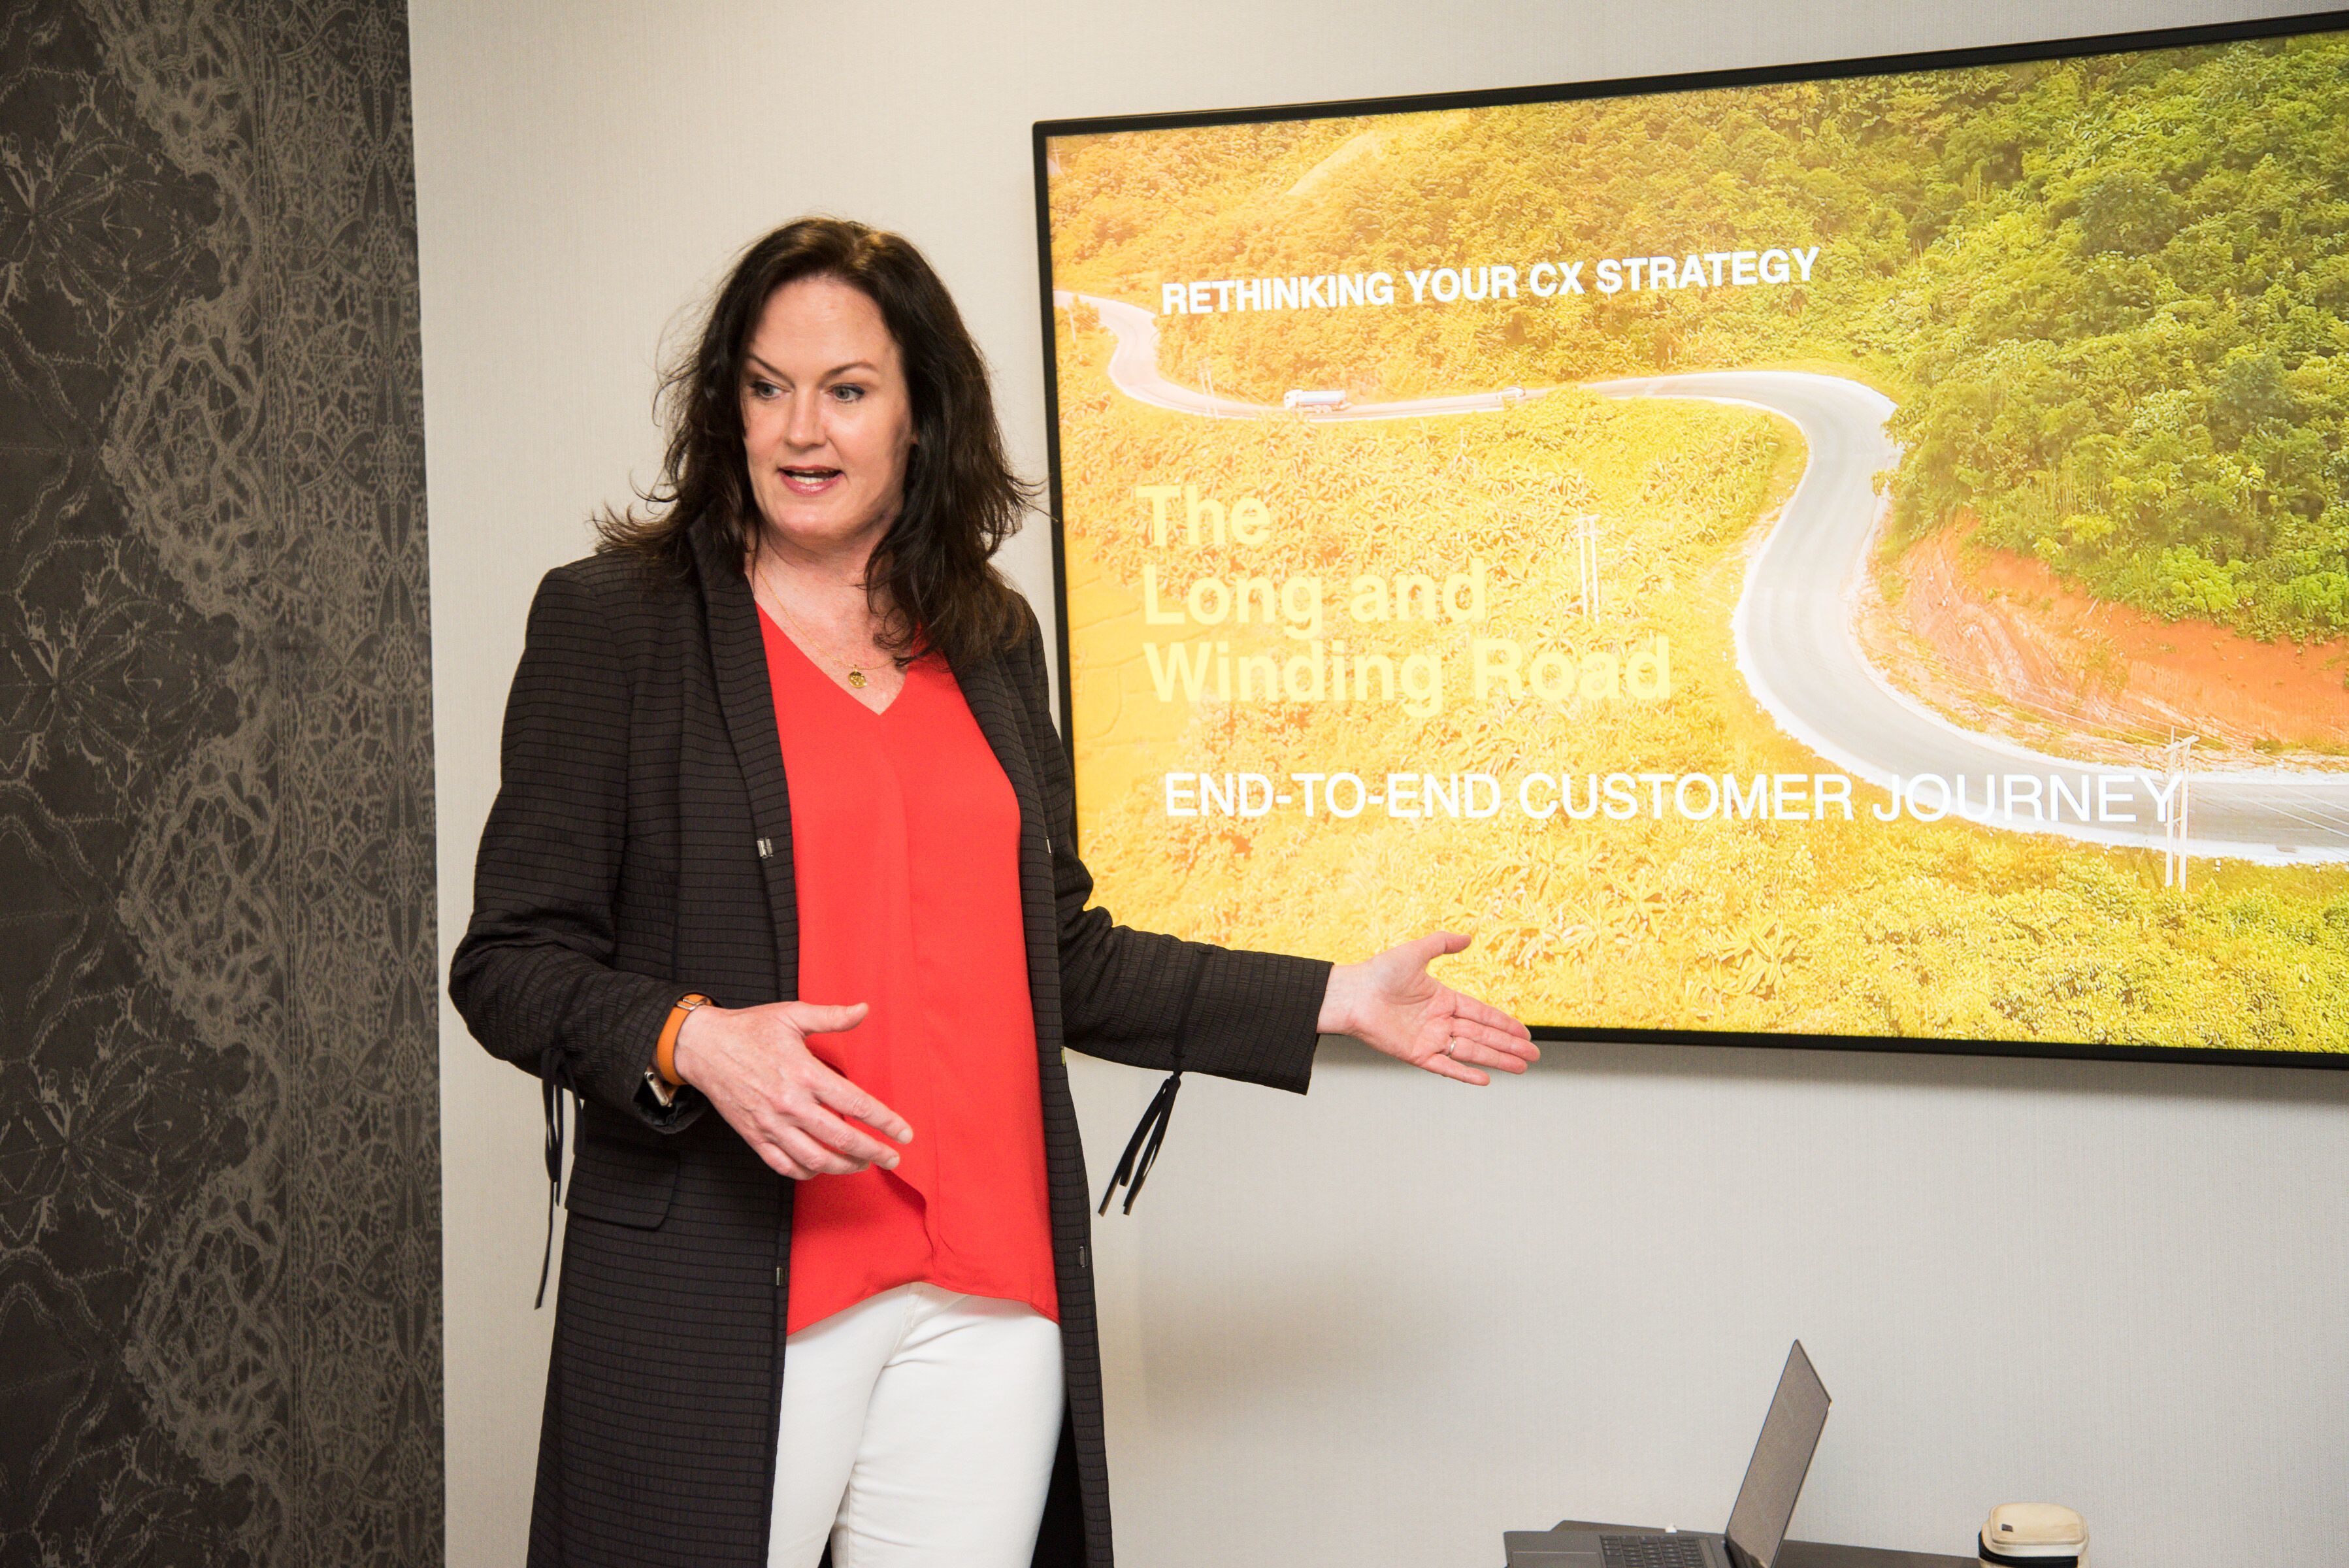 Kerri Konik discusses how to build a brand and strong CX